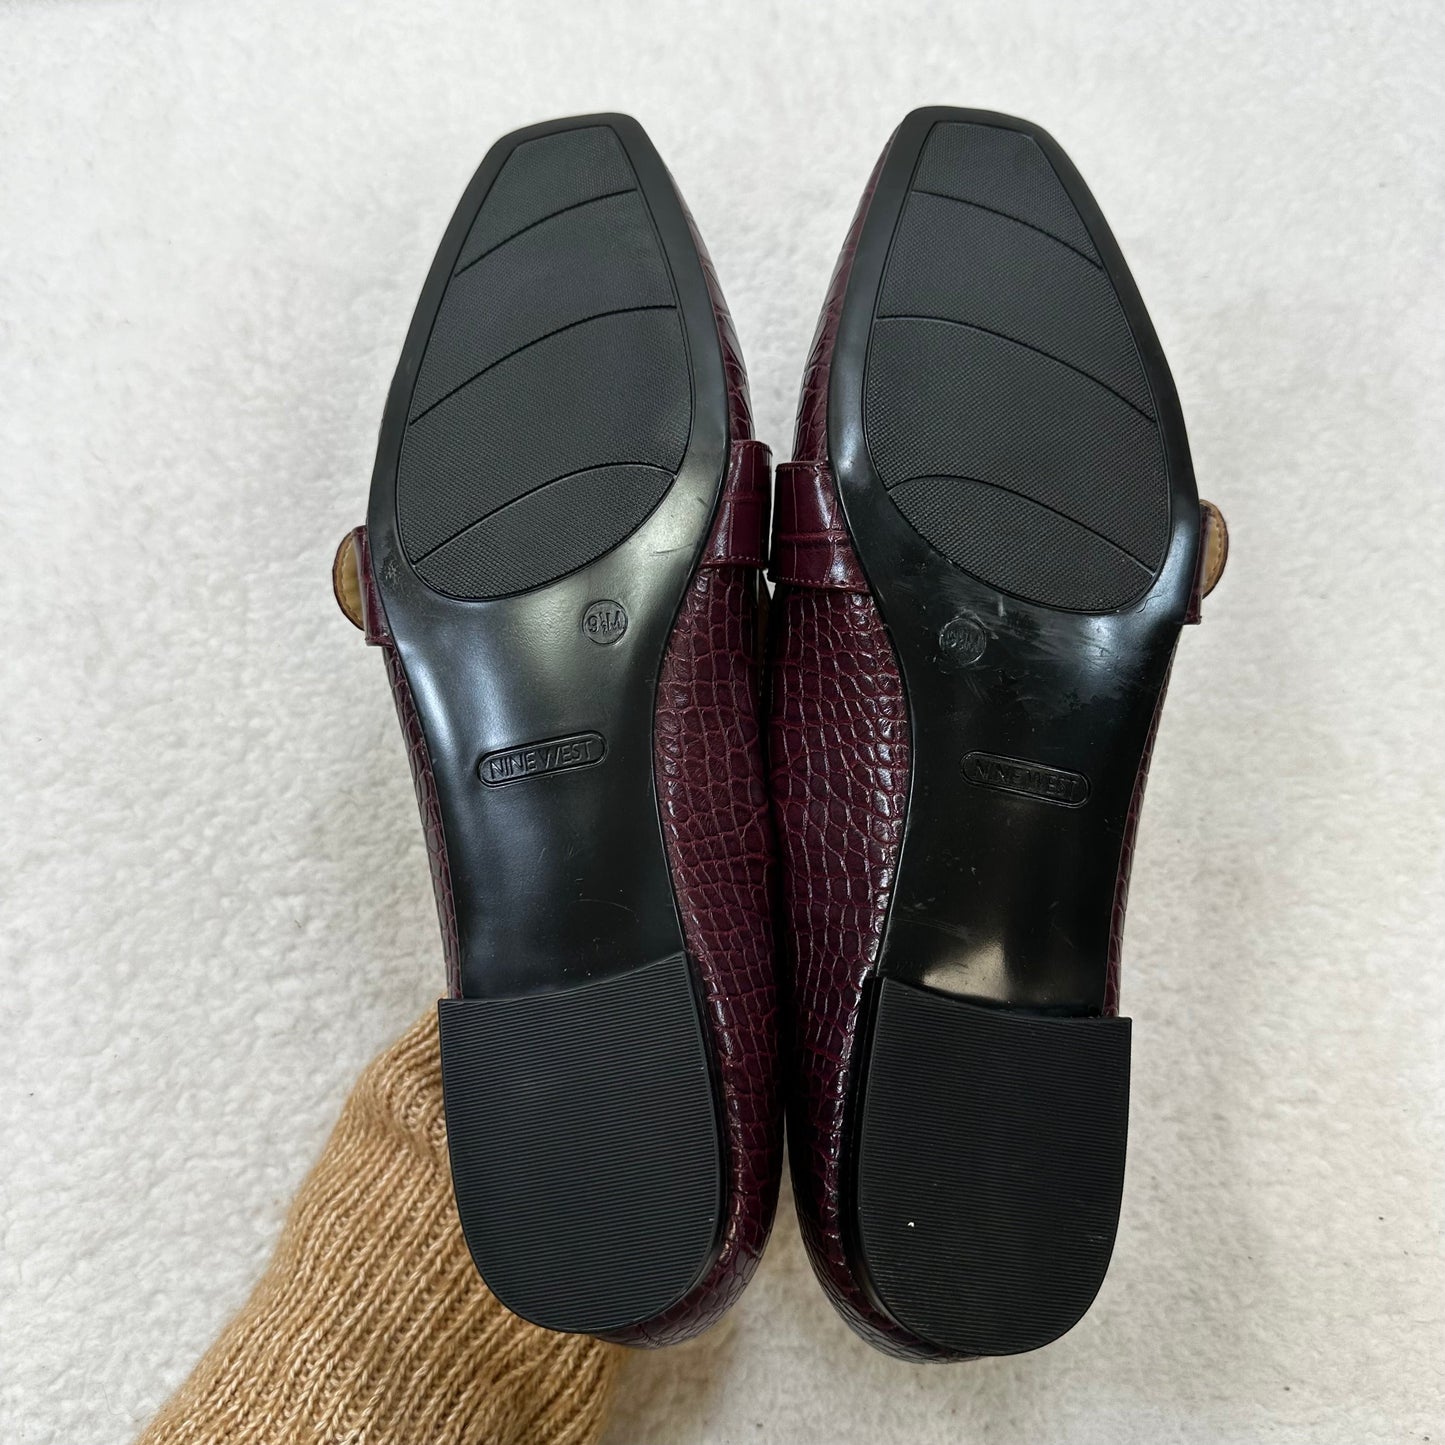 Maroon Shoes Flats Loafer Oxford Nine West, Size 9.5